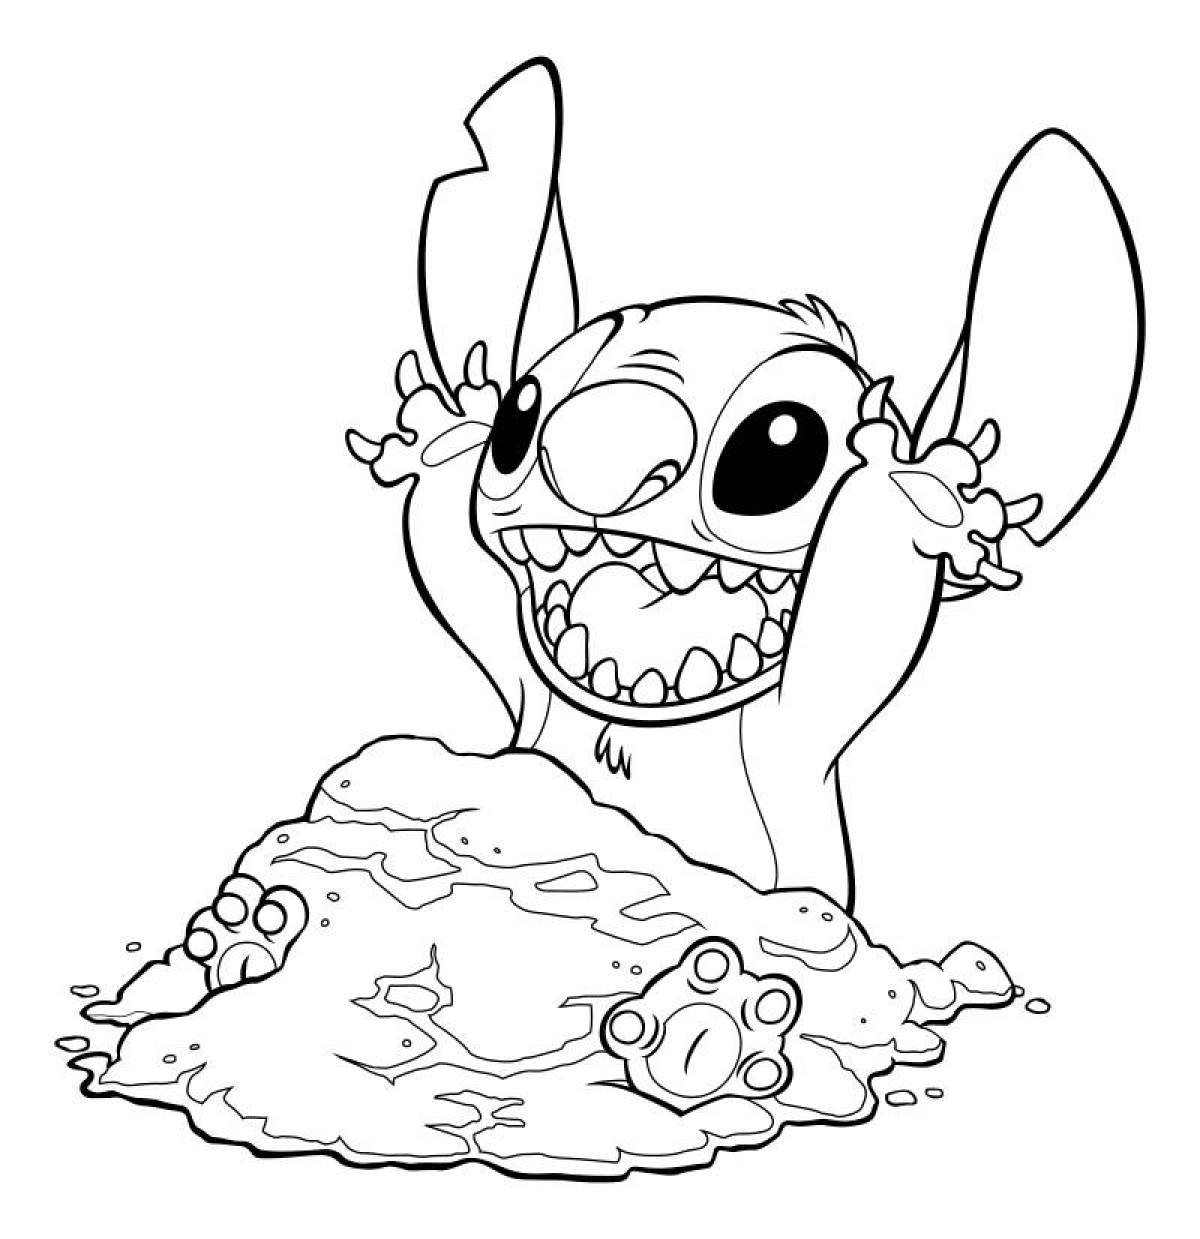 Animated sewing coloring page